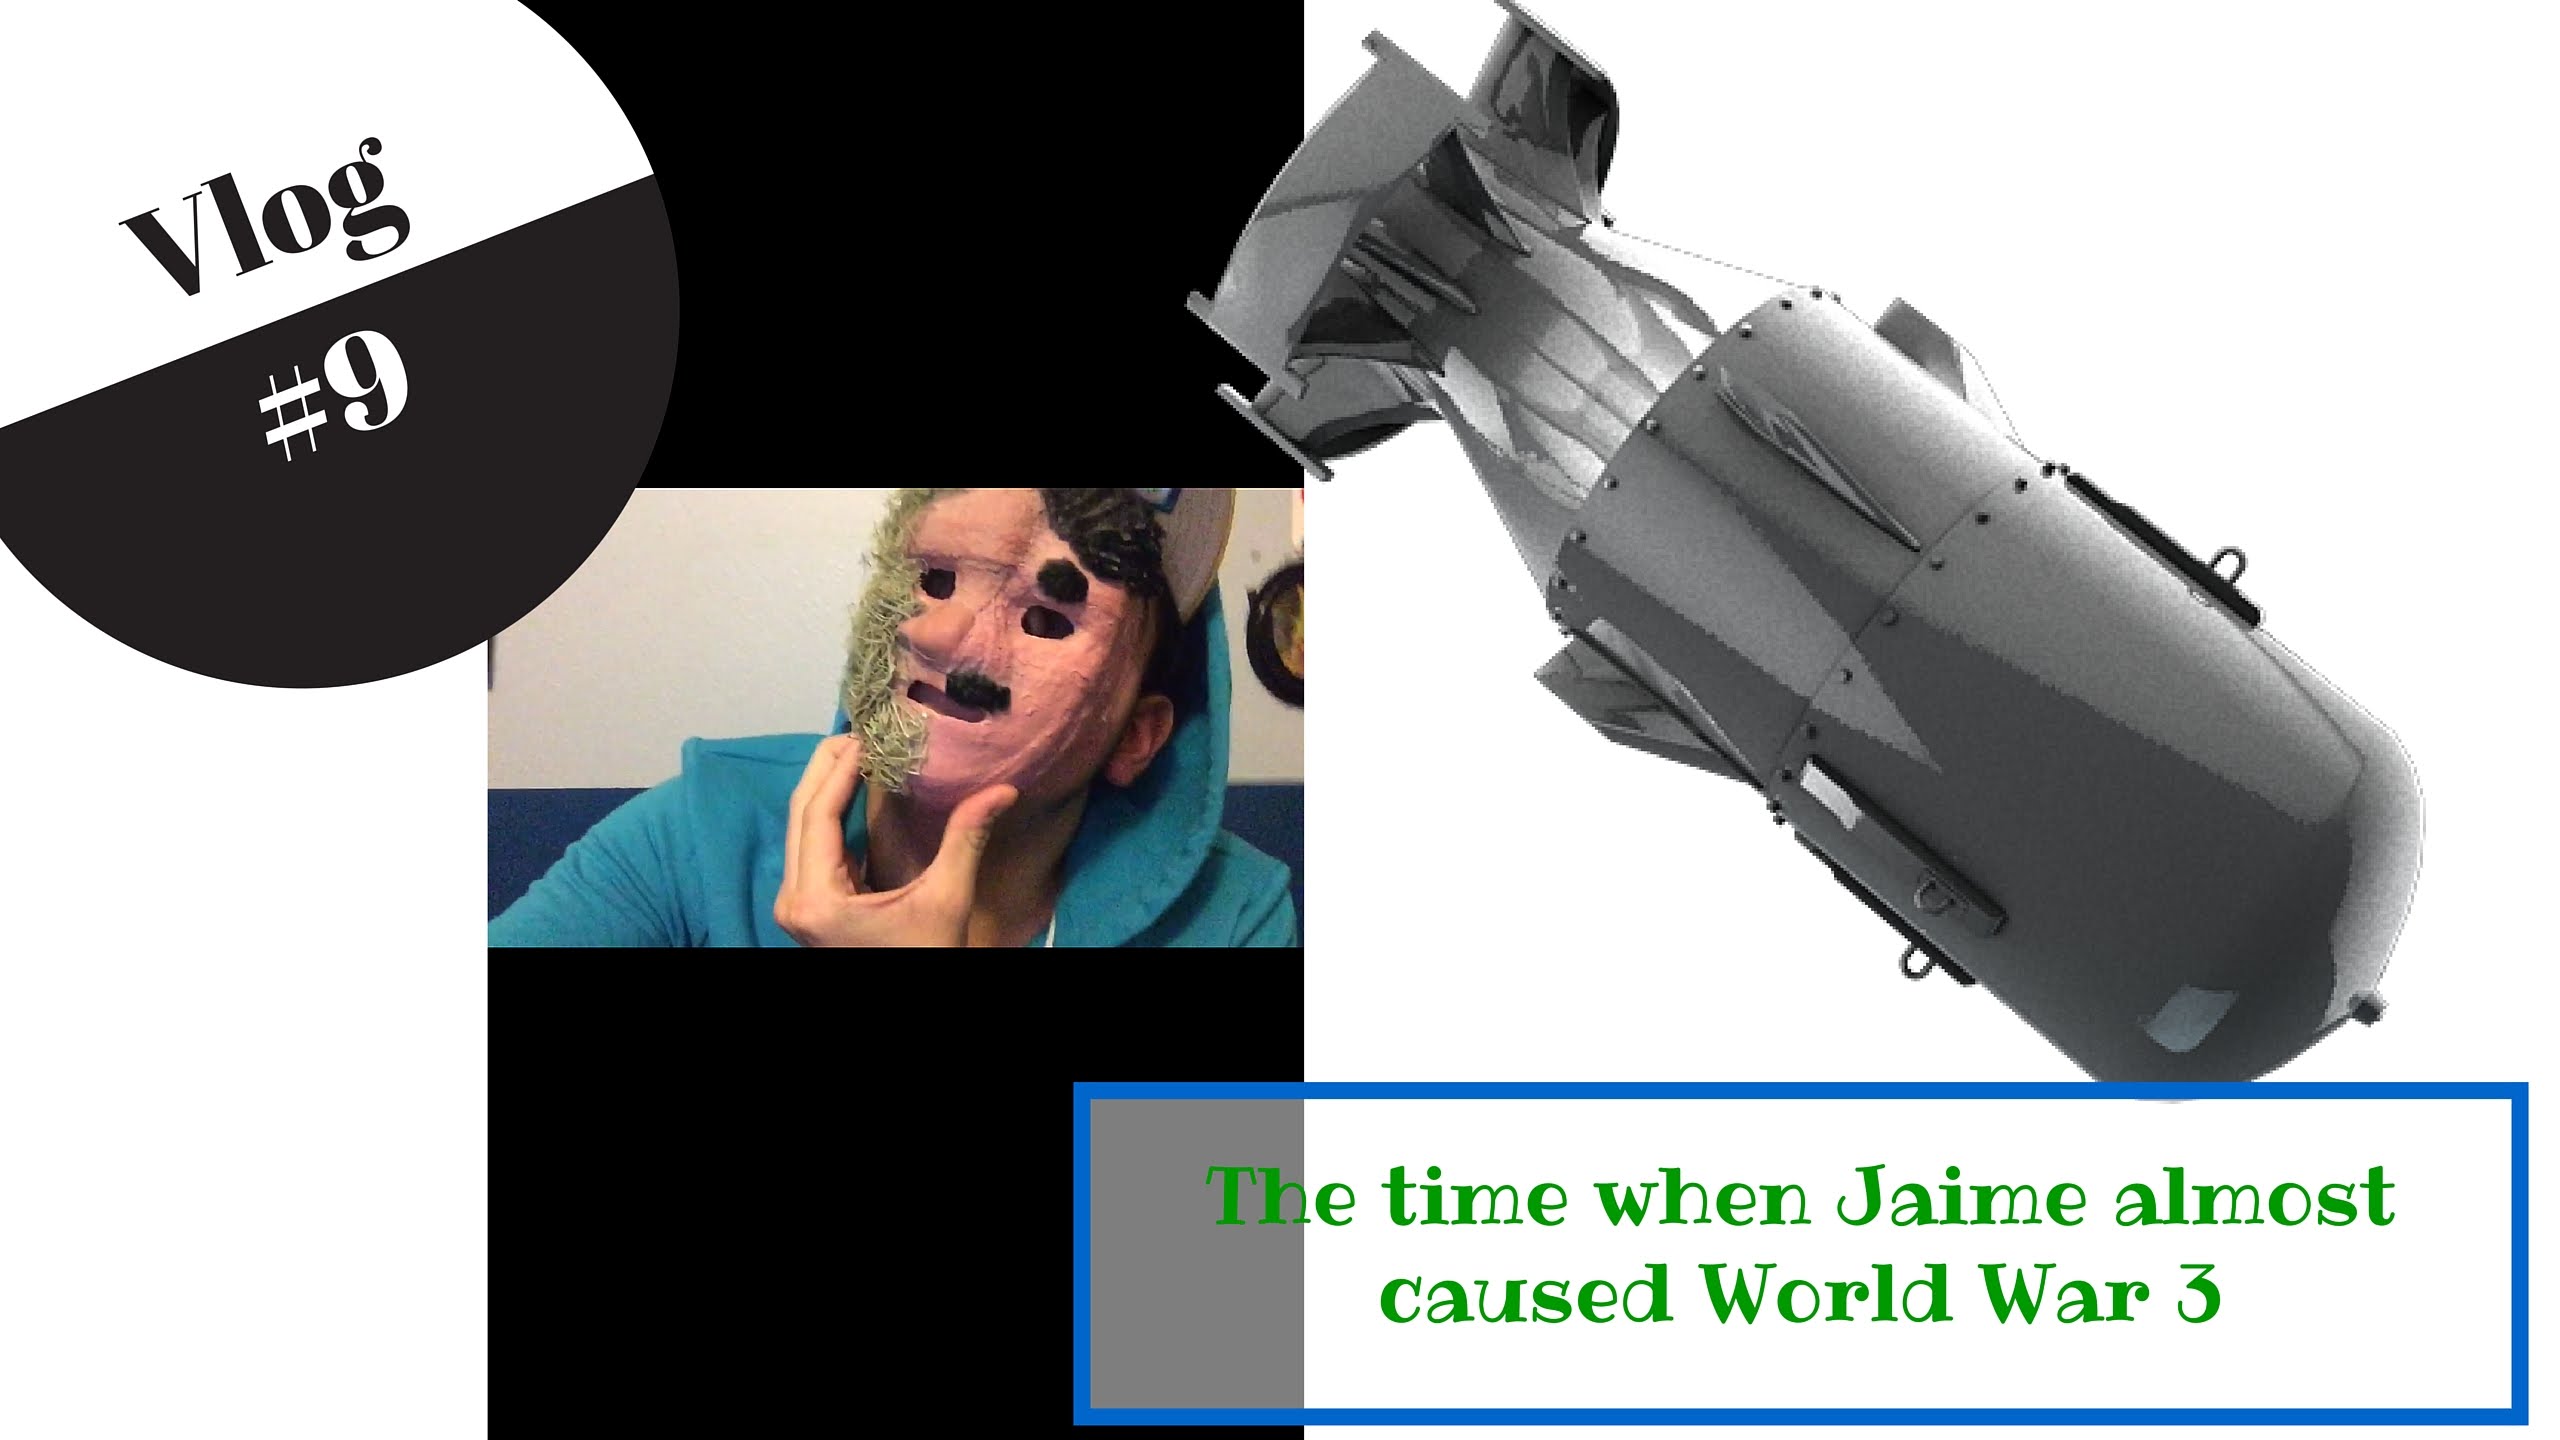 The time when Jaime almost caused World War 3!!! (Vlog #9)